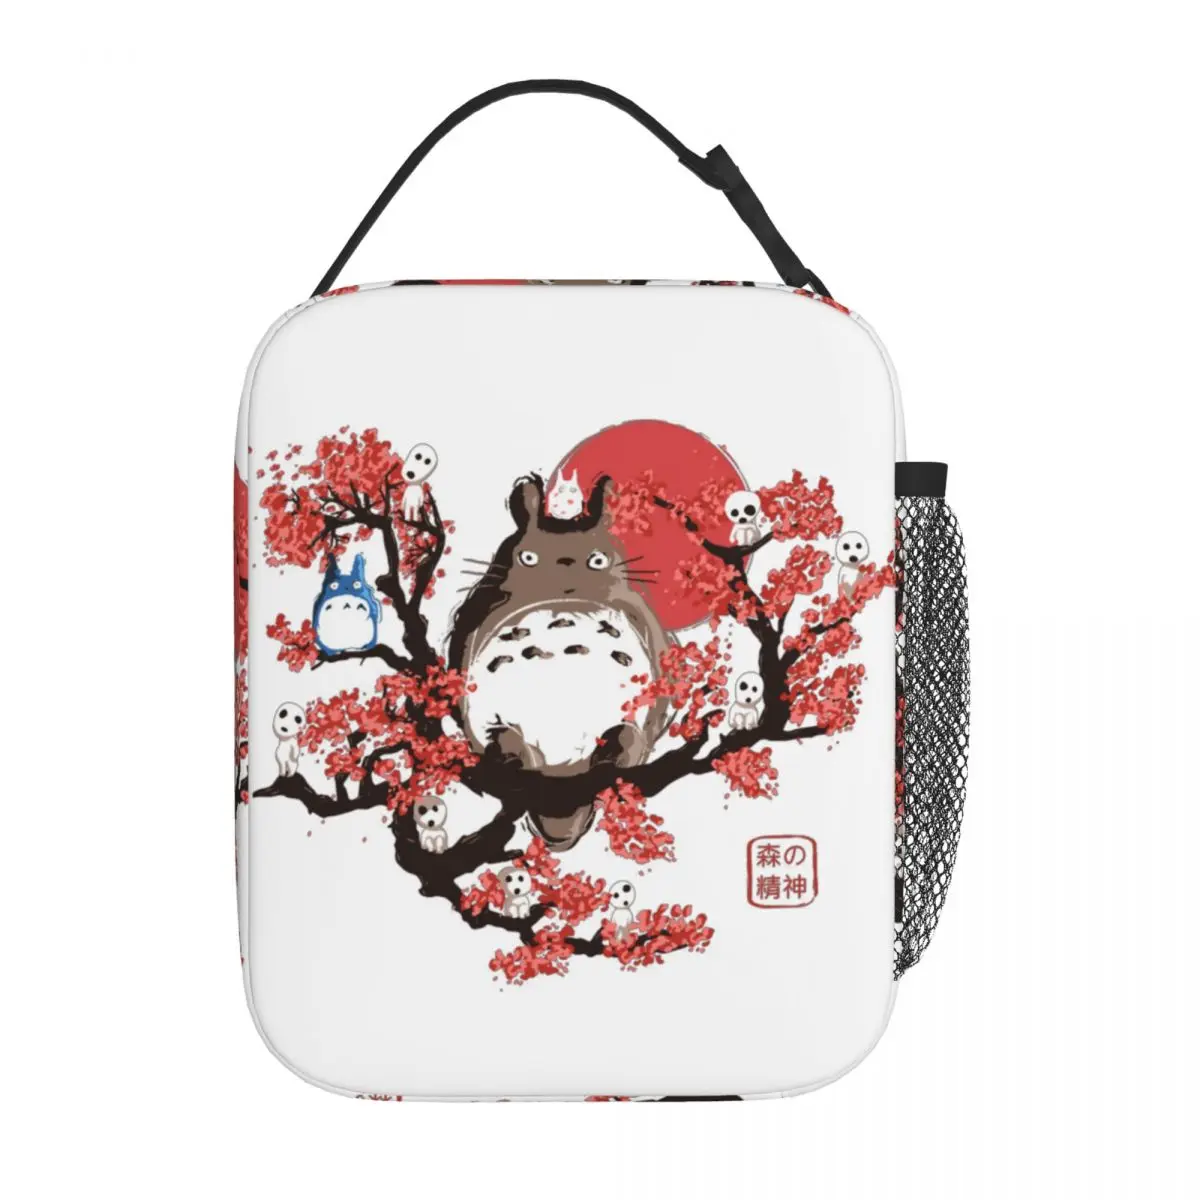 

My Neighbor Totoro Forest Spirit Insulated Lunch Boxes Kawaii Cute Totoros Kodama Lunch Container Thermal Cooler Lunch Bag